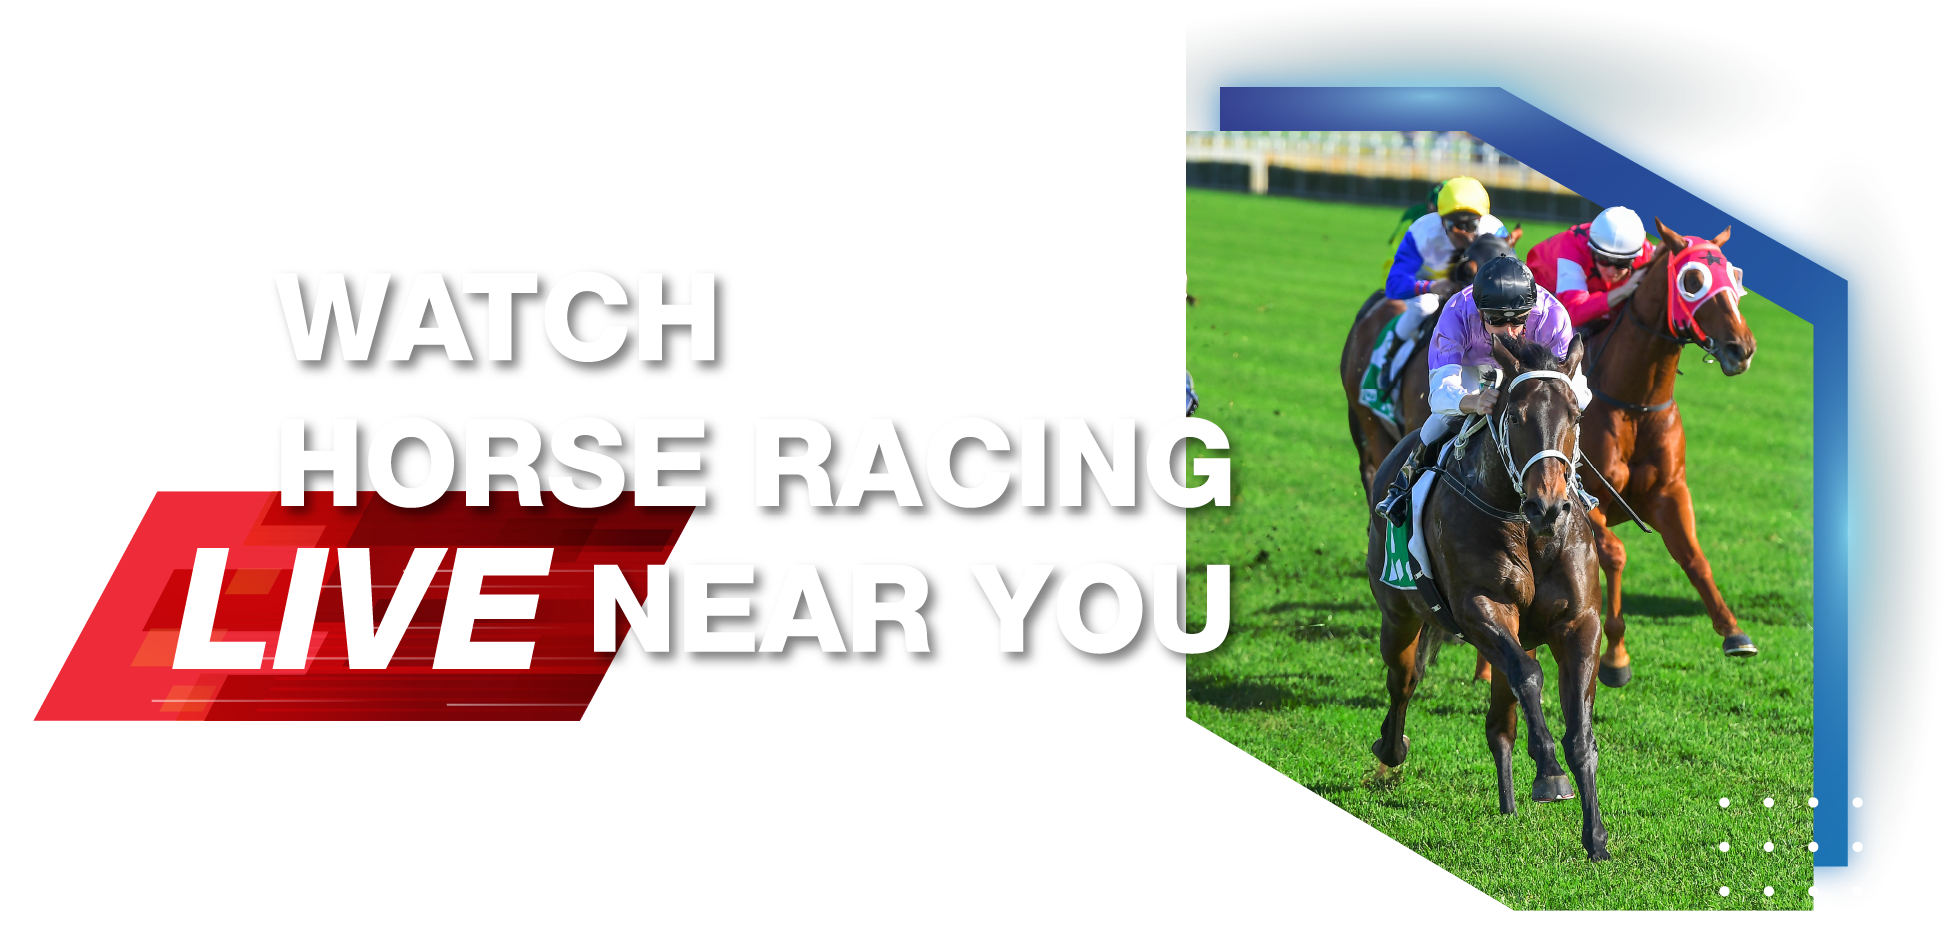 jurong-east-betting-centre-watch-horse-racing-live-near-you